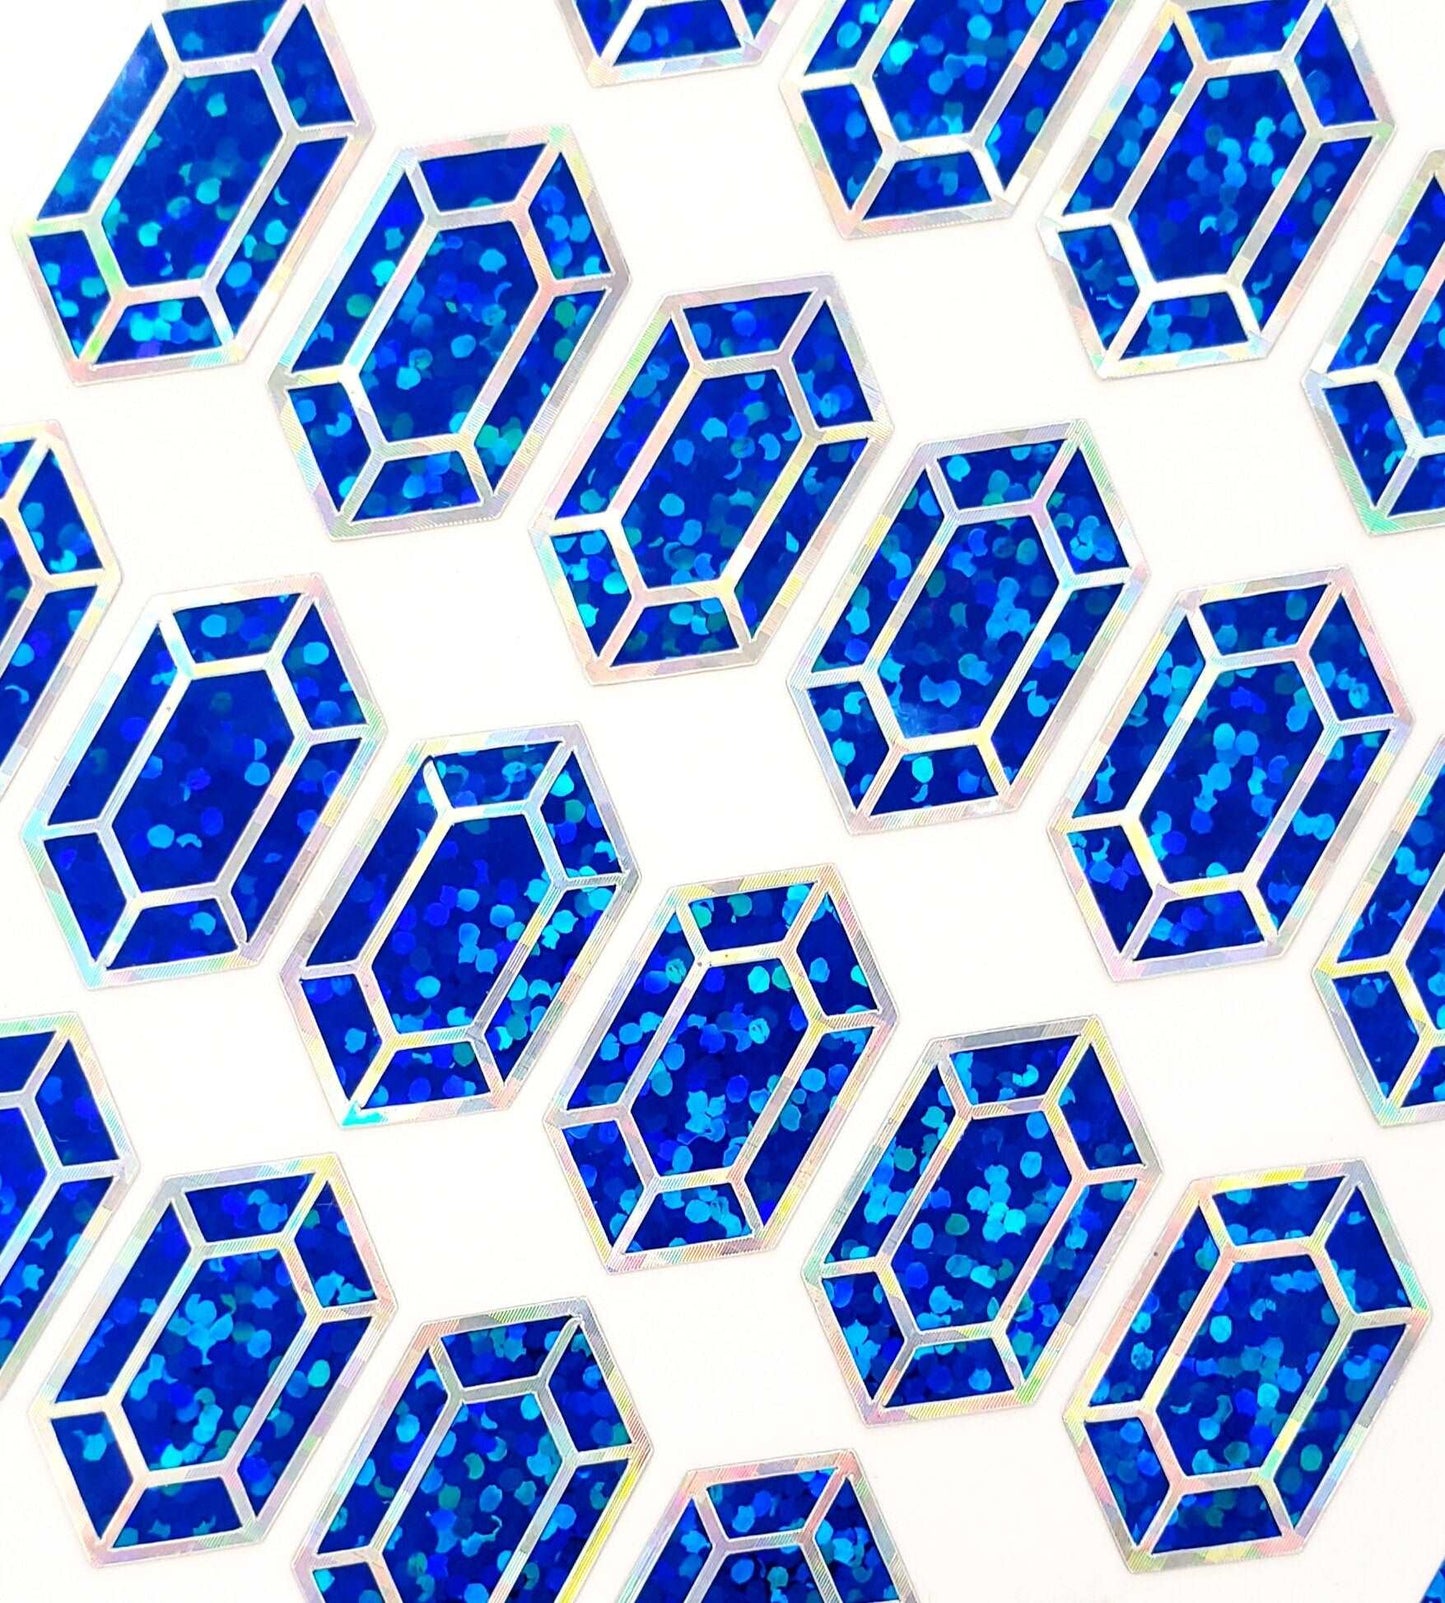 Blue gemstone stickers, set of 36 small sparkly sapphire blue gem shaped vinyl decals. Treasure stickers for gamers.